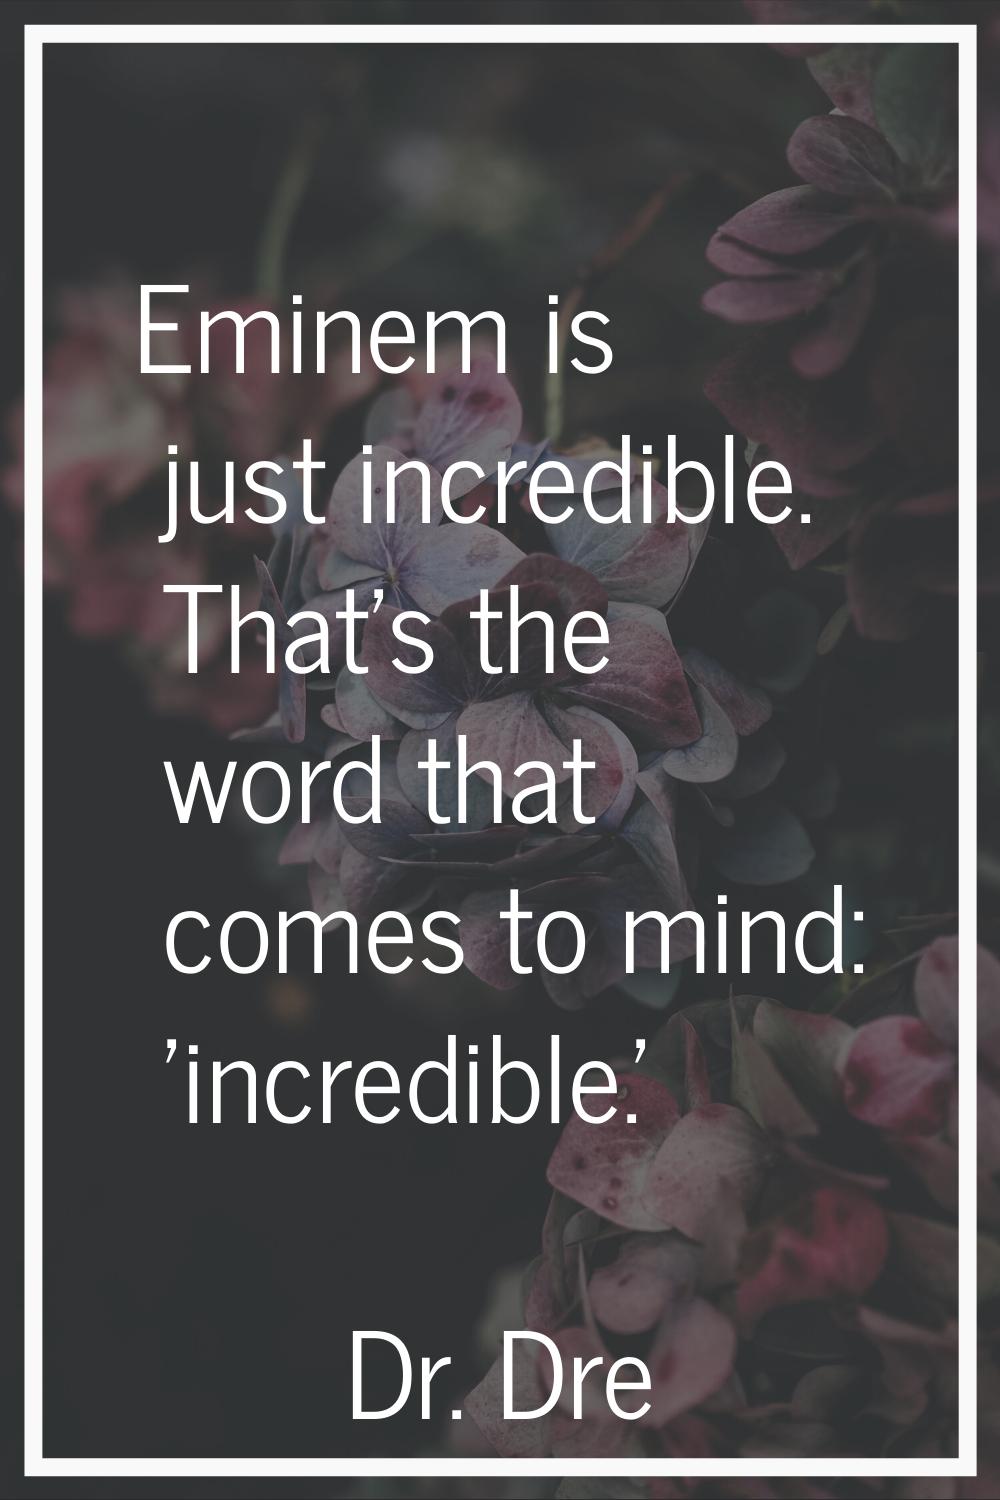 Eminem is just incredible. That's the word that comes to mind: 'incredible.'